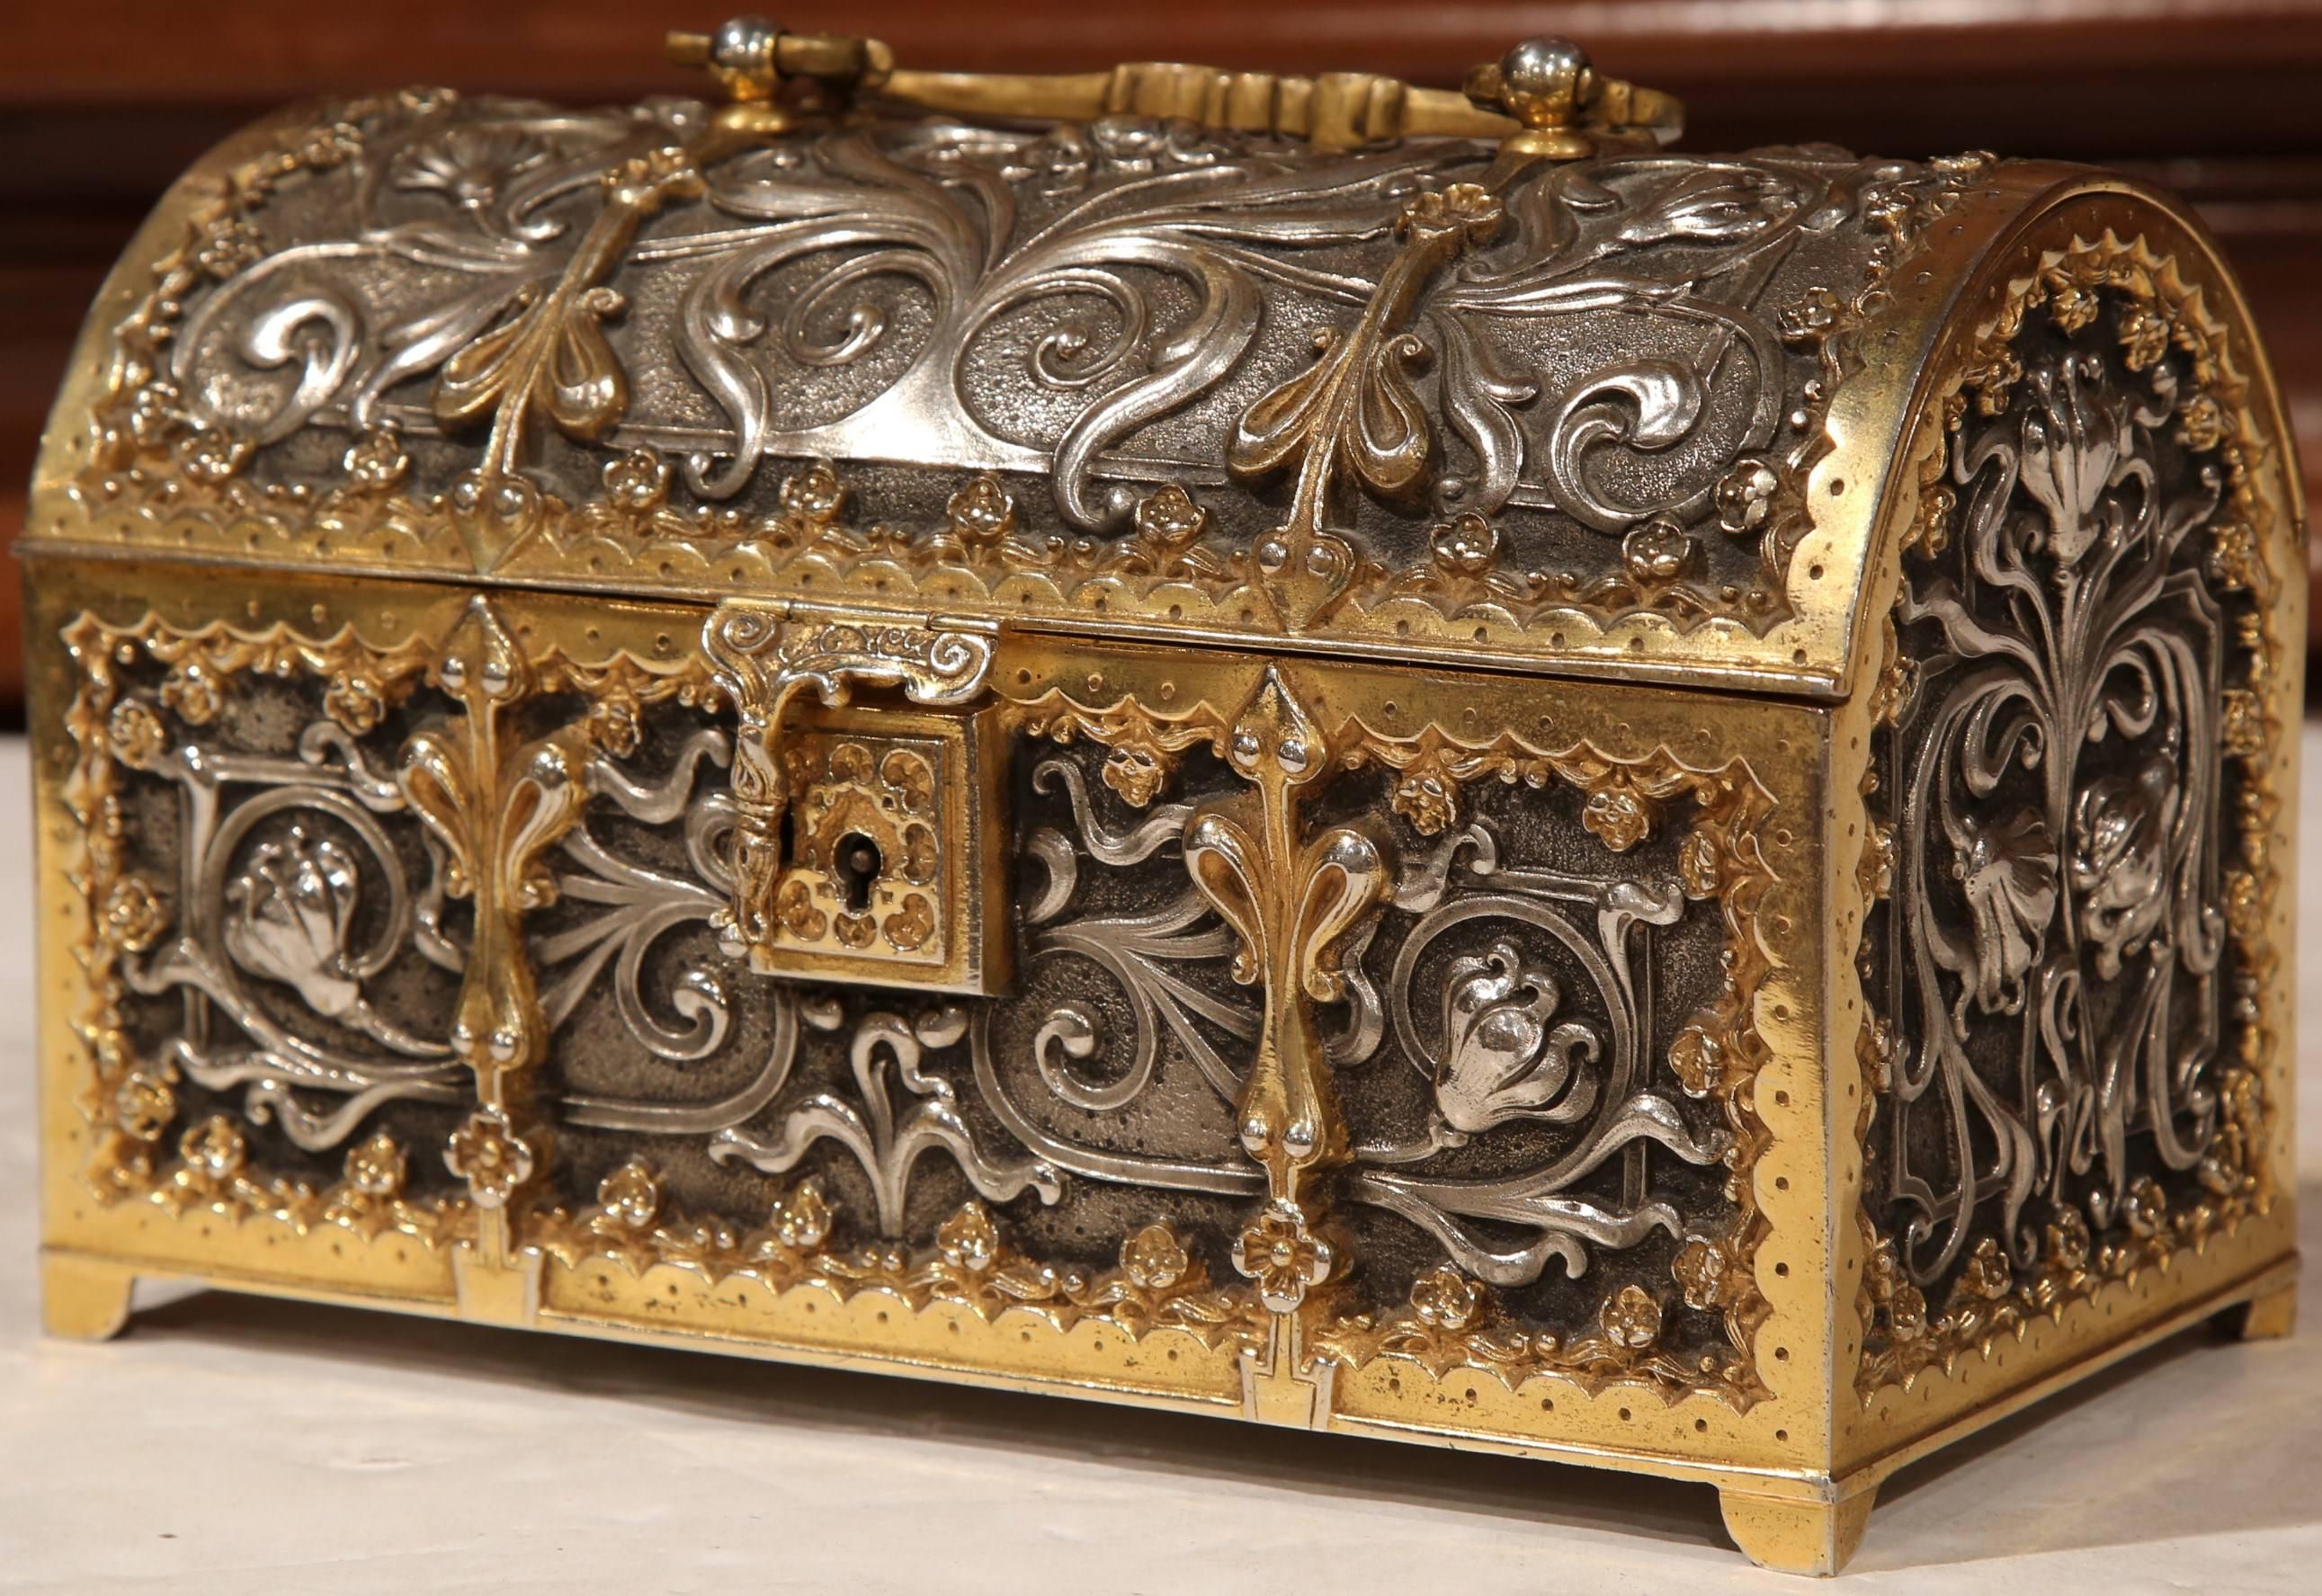 This antique silver and gilt bronze box was created in France, circa 1850. The trunk-shaped box features intricate work on all four sides, a bombe top with handle. The metallic silver and gold, two-toned decorative box includes its original red